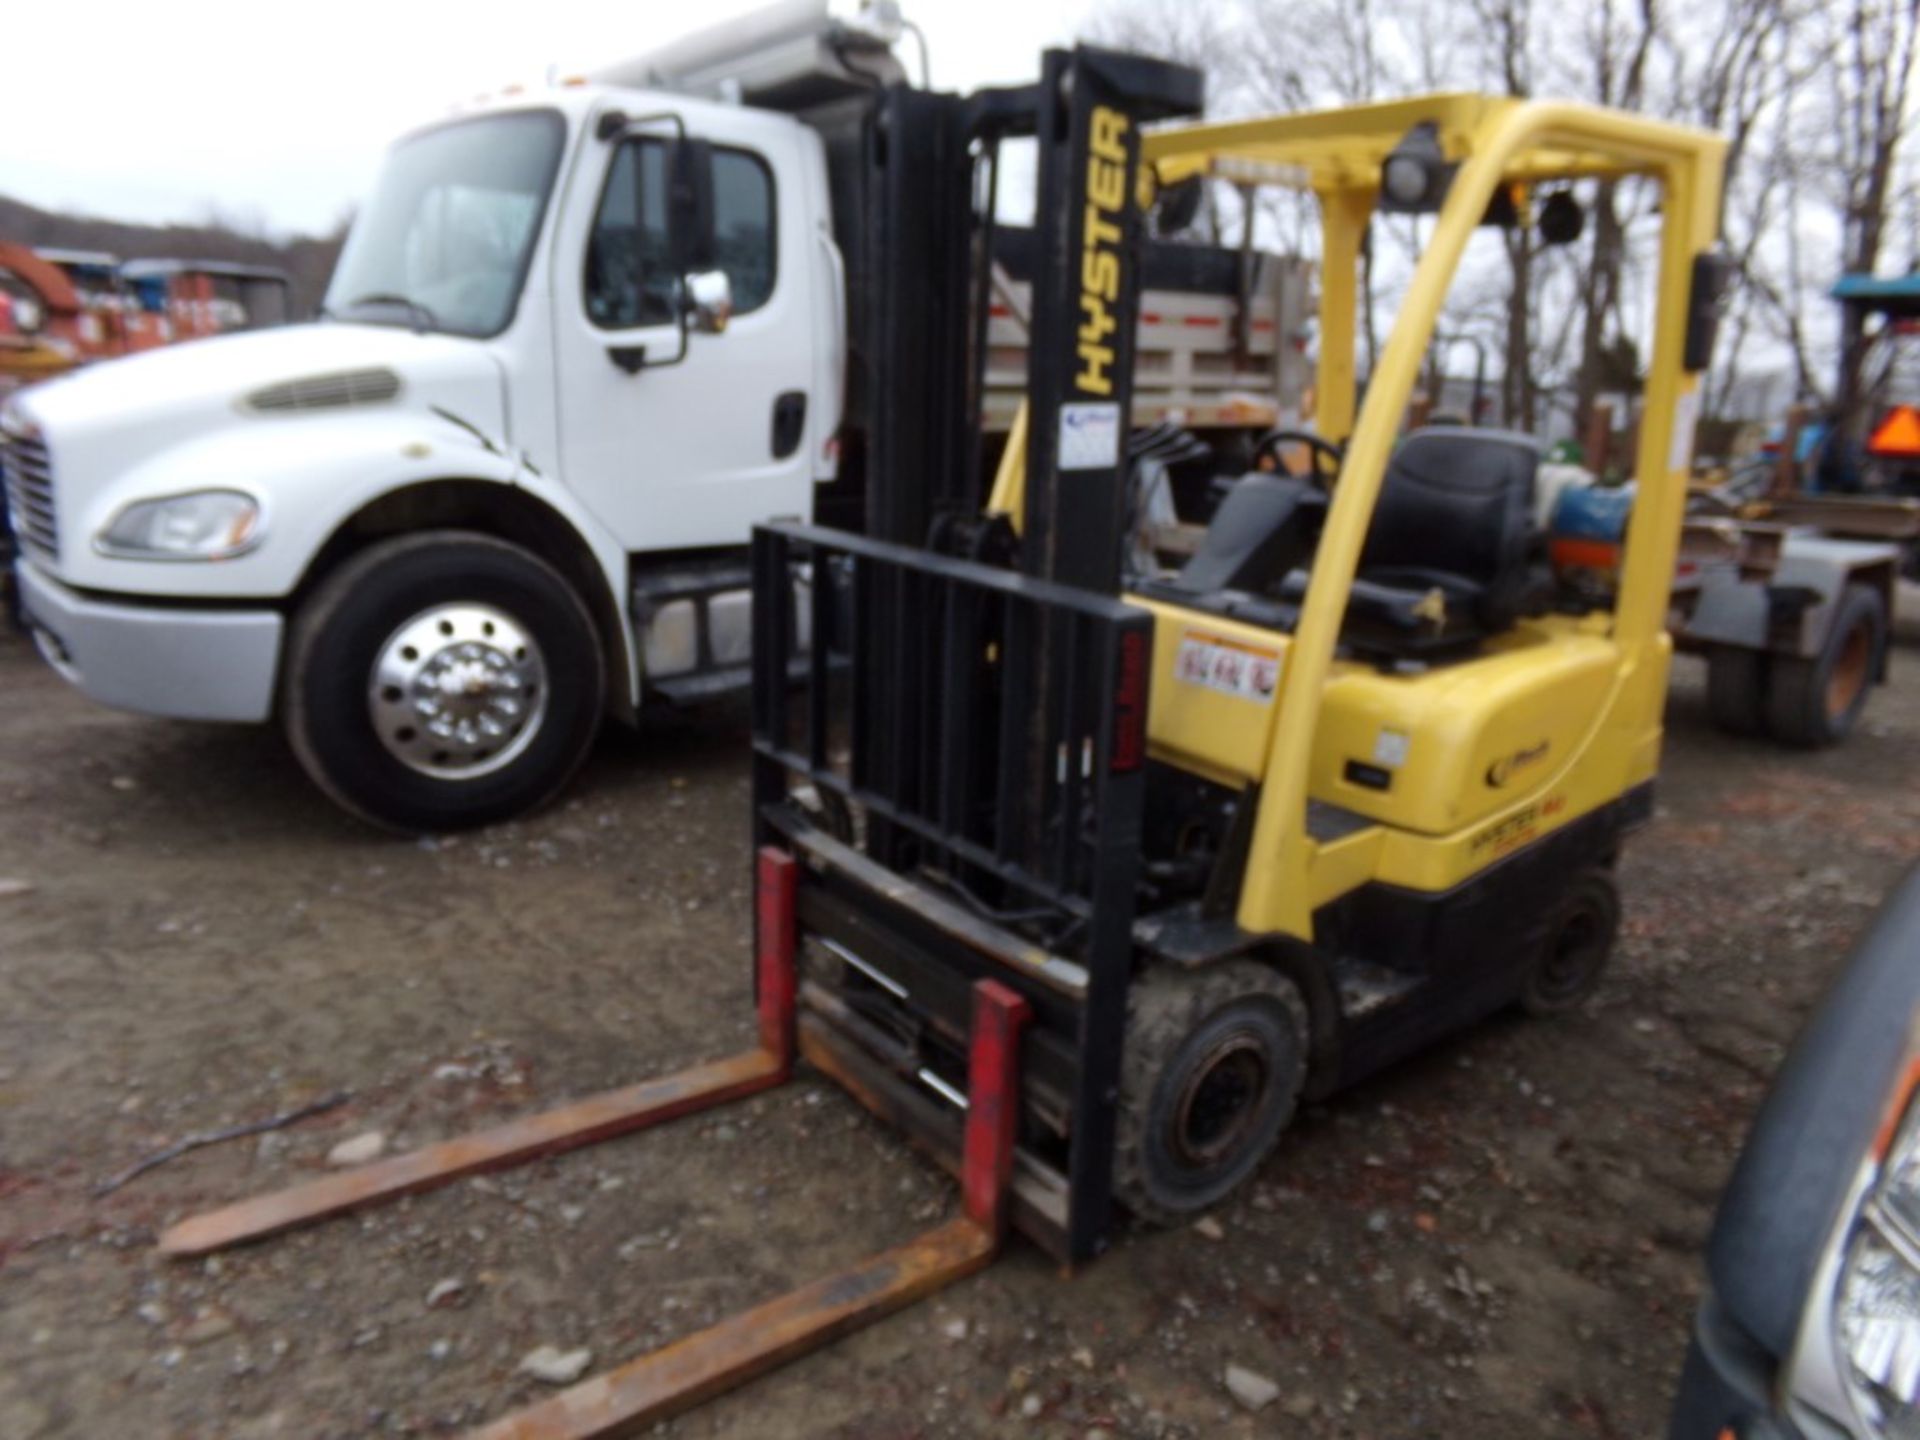 Hyster Fortis 40 Propane Indoor Forklift, 2609 Hrs., Truck Wt. 7410, Lift Capacity 3,650, NO Propane